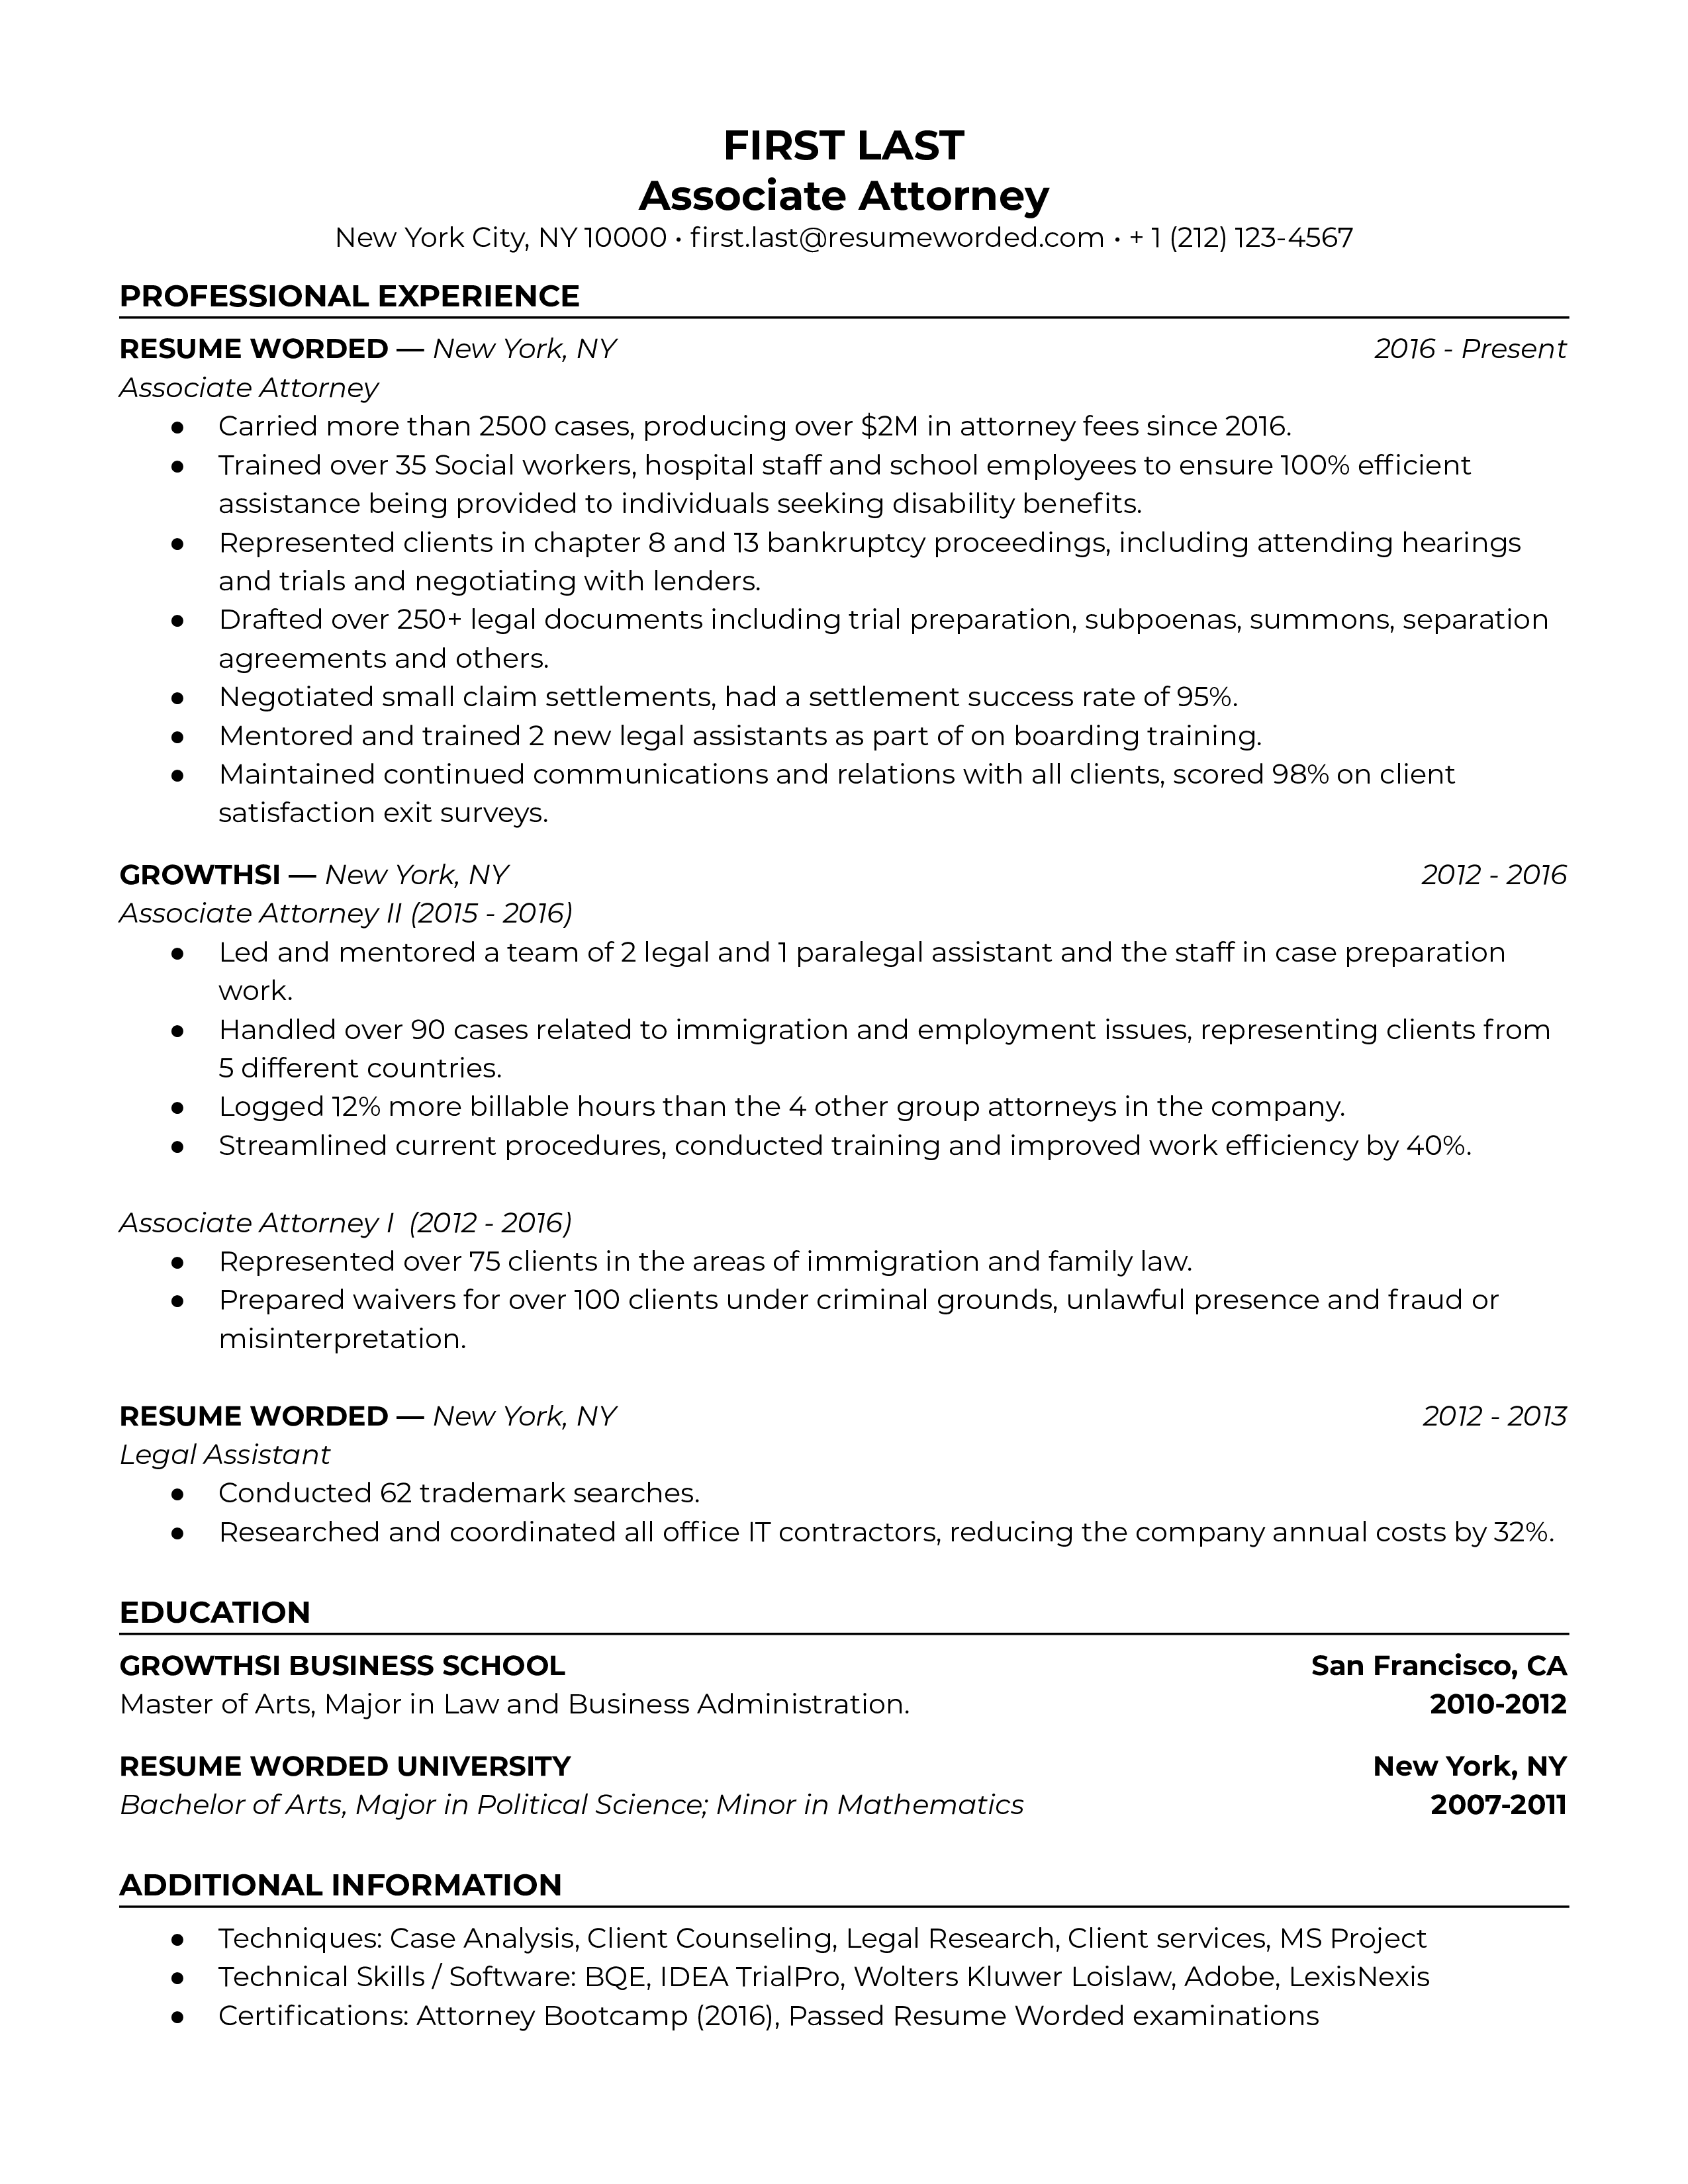 Associate attorney resume template example with a resume title and organized skills section